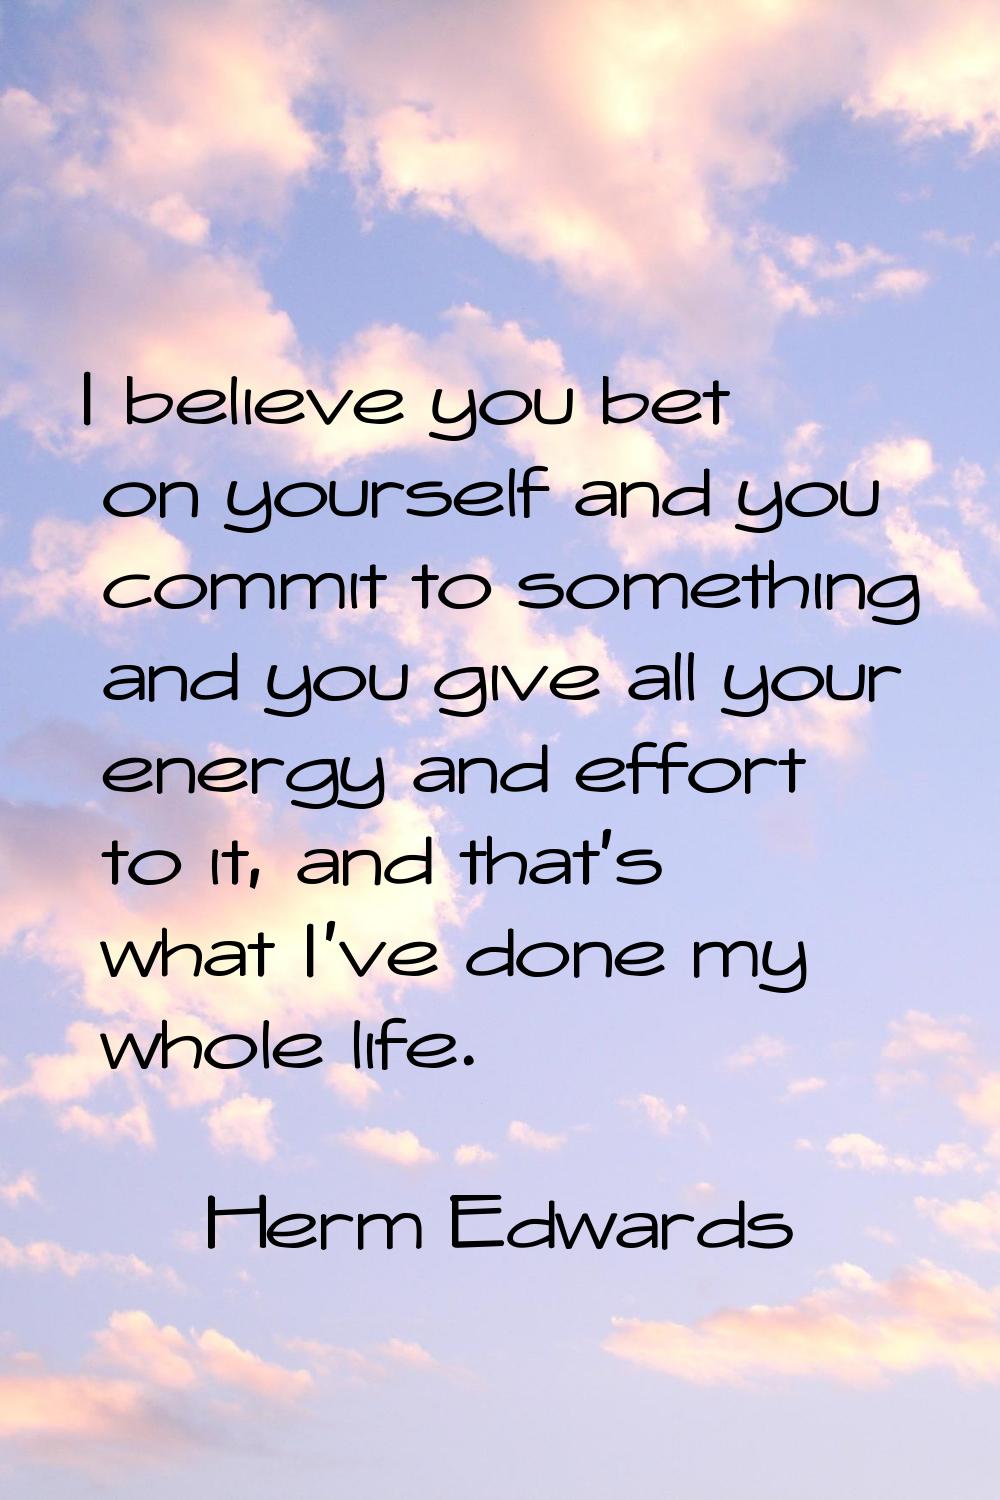 I believe you bet on yourself and you commit to something and you give all your energy and effort t